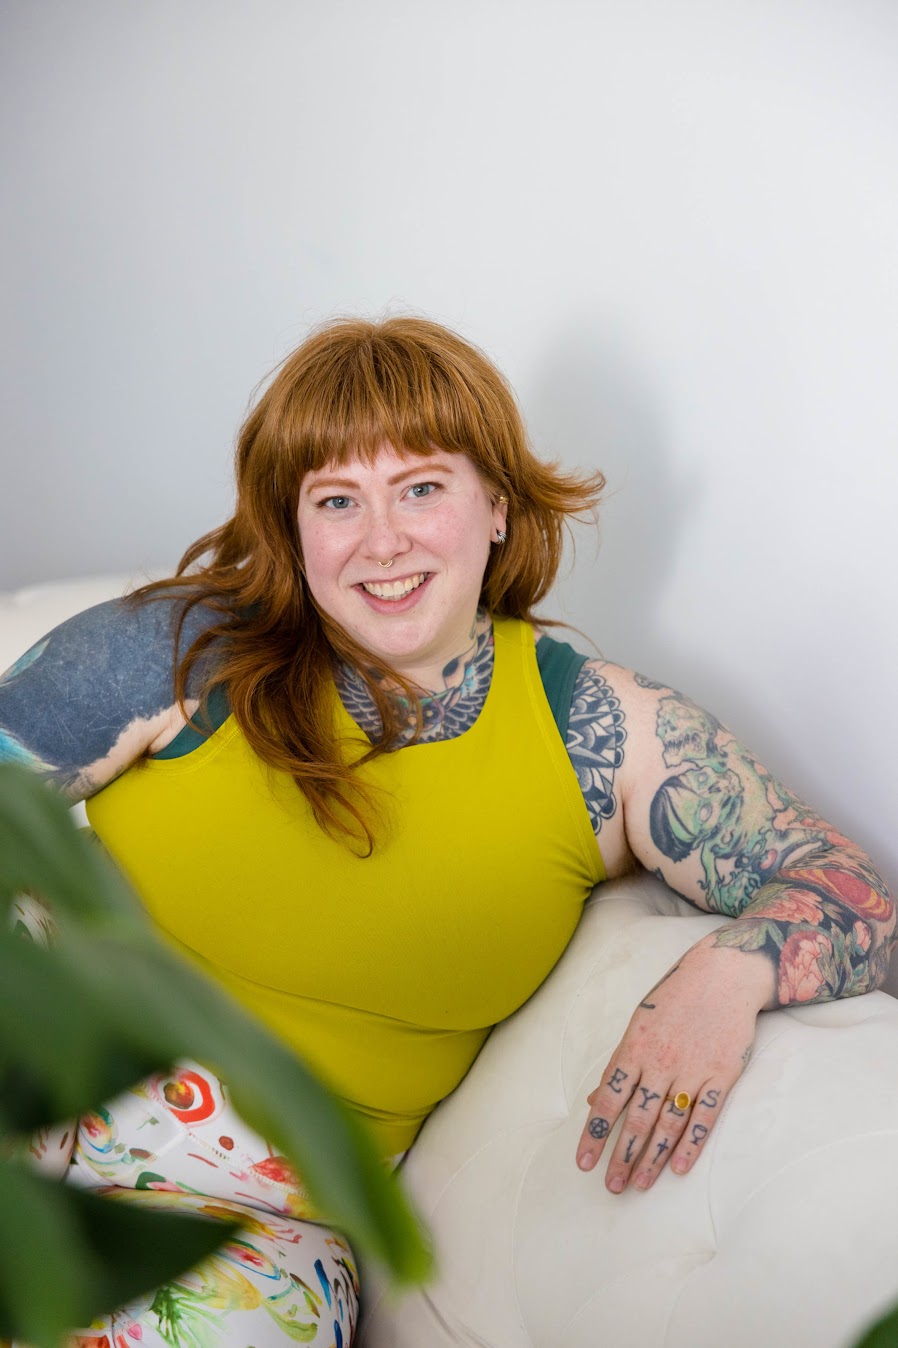 An individual in front of a white wall with athletic clothing on, tattoos on their arms, and long, orange hair.